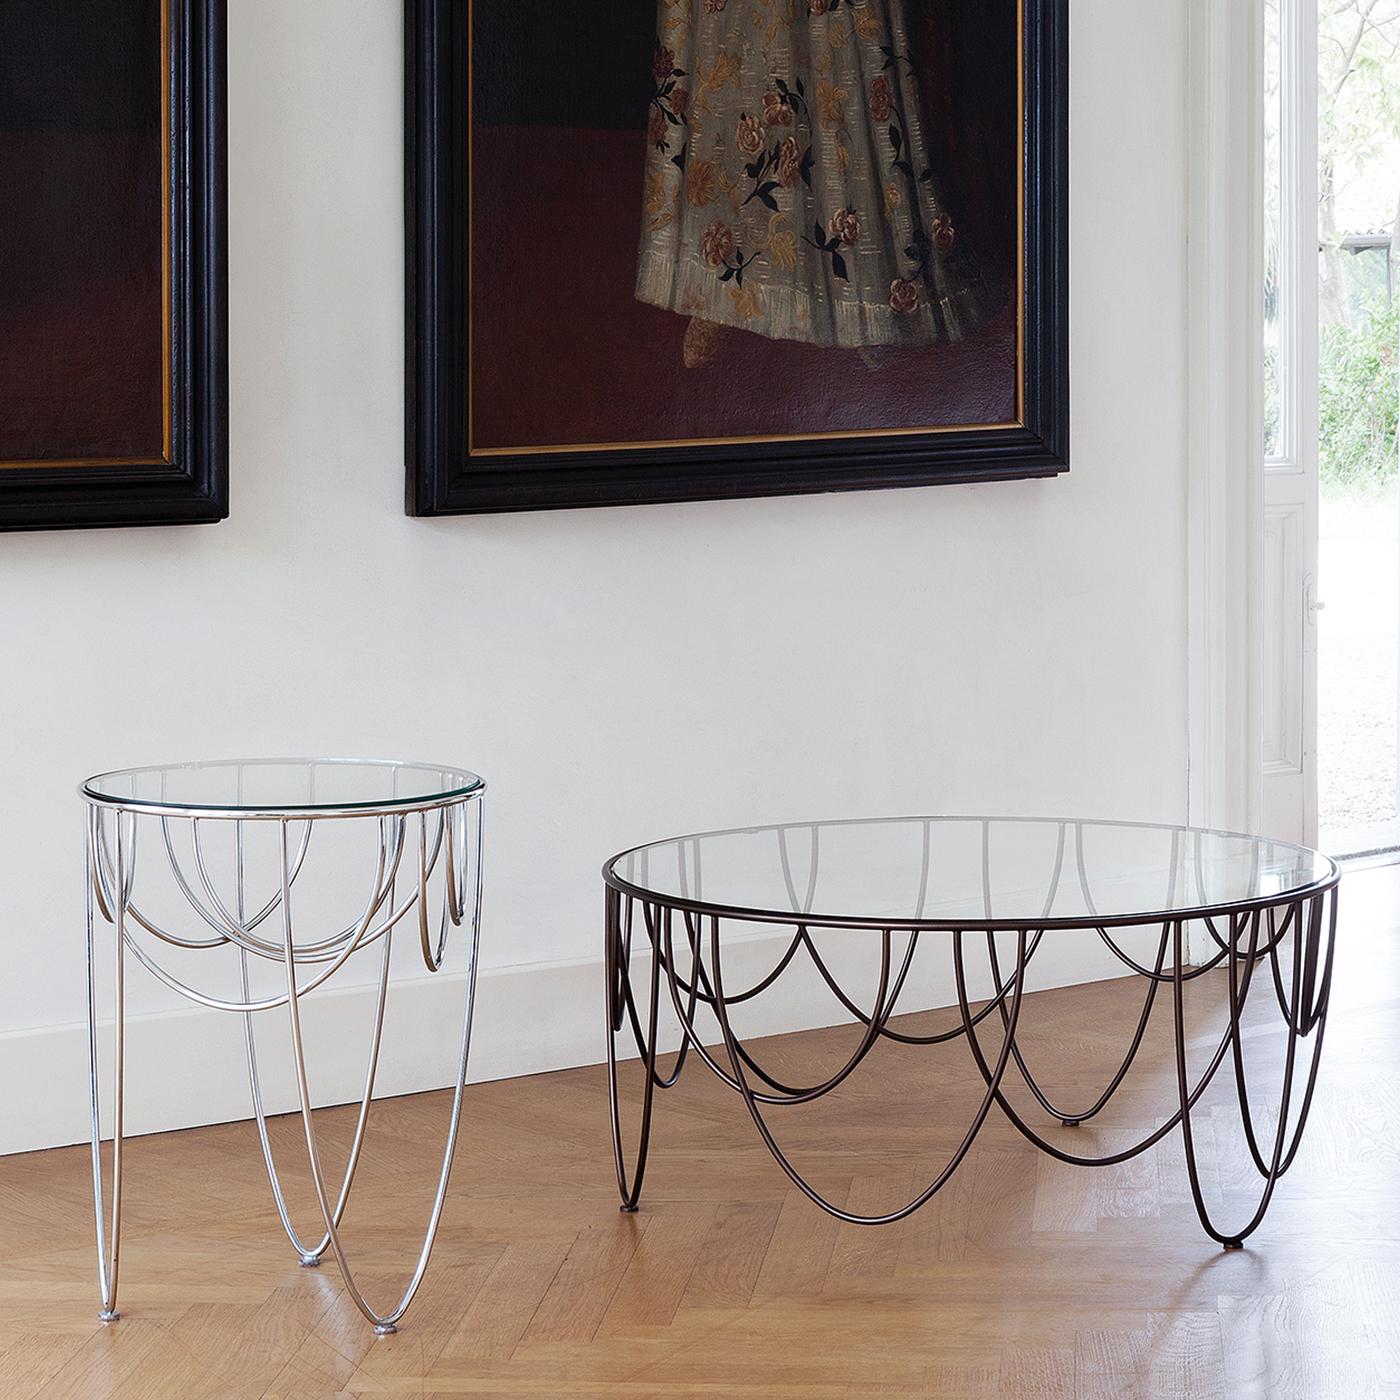 This spectacular, sculptural side table is distinguished by a captivating structure that draws inspiration from the drapery of stage curtains. Made of powder-coated steel rods, it supports a large round top in tempered crystal. This piece will